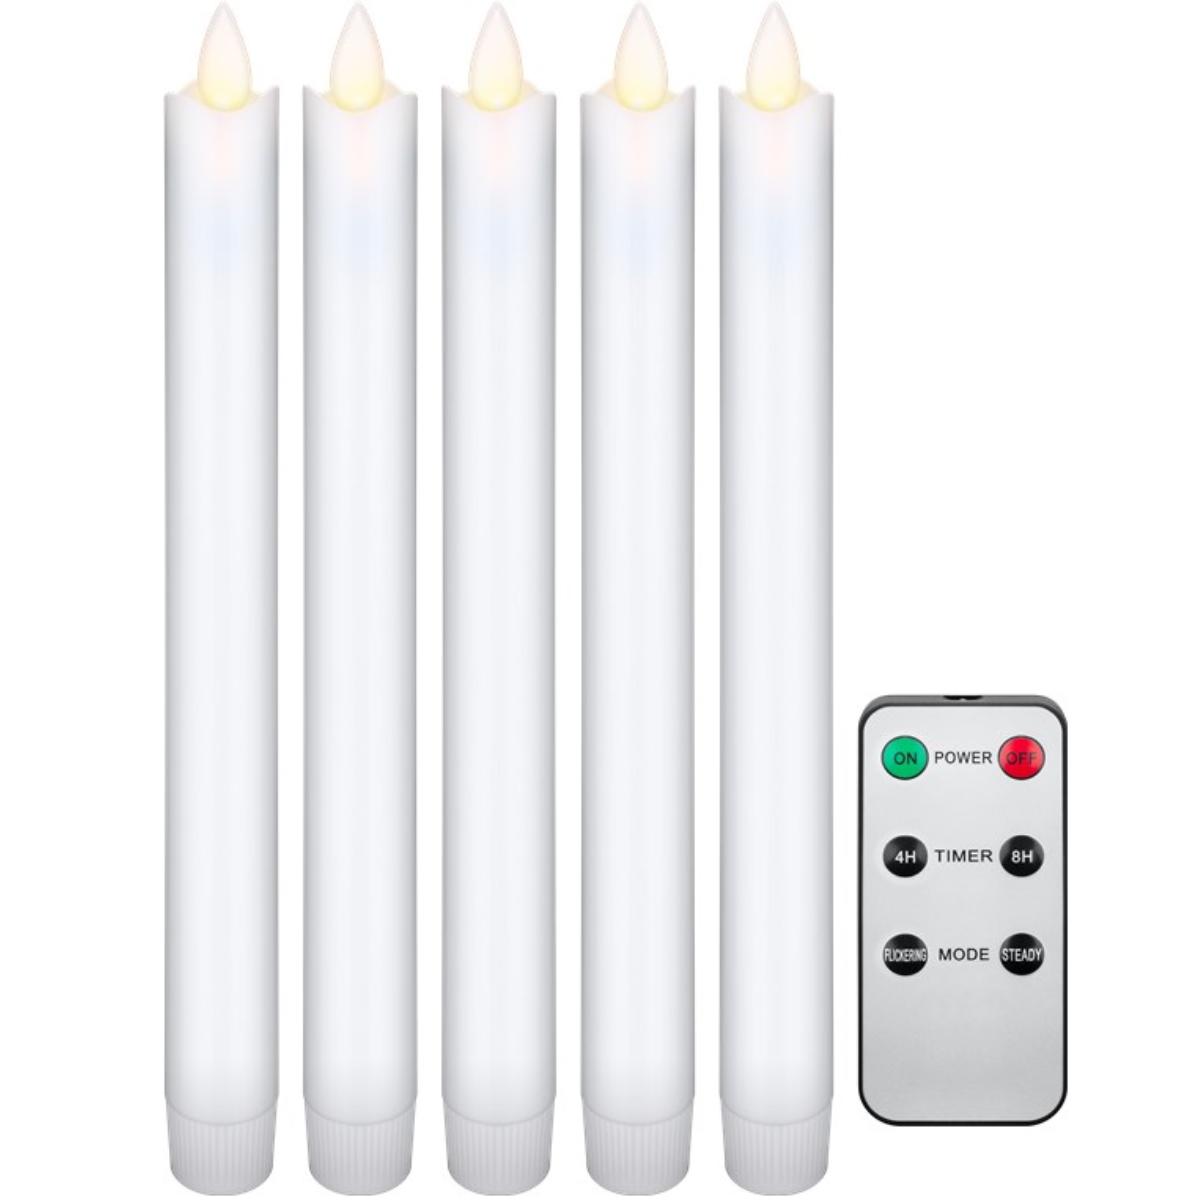 Set of 5 white LED real wax rod candles, incl. remote control beautiful